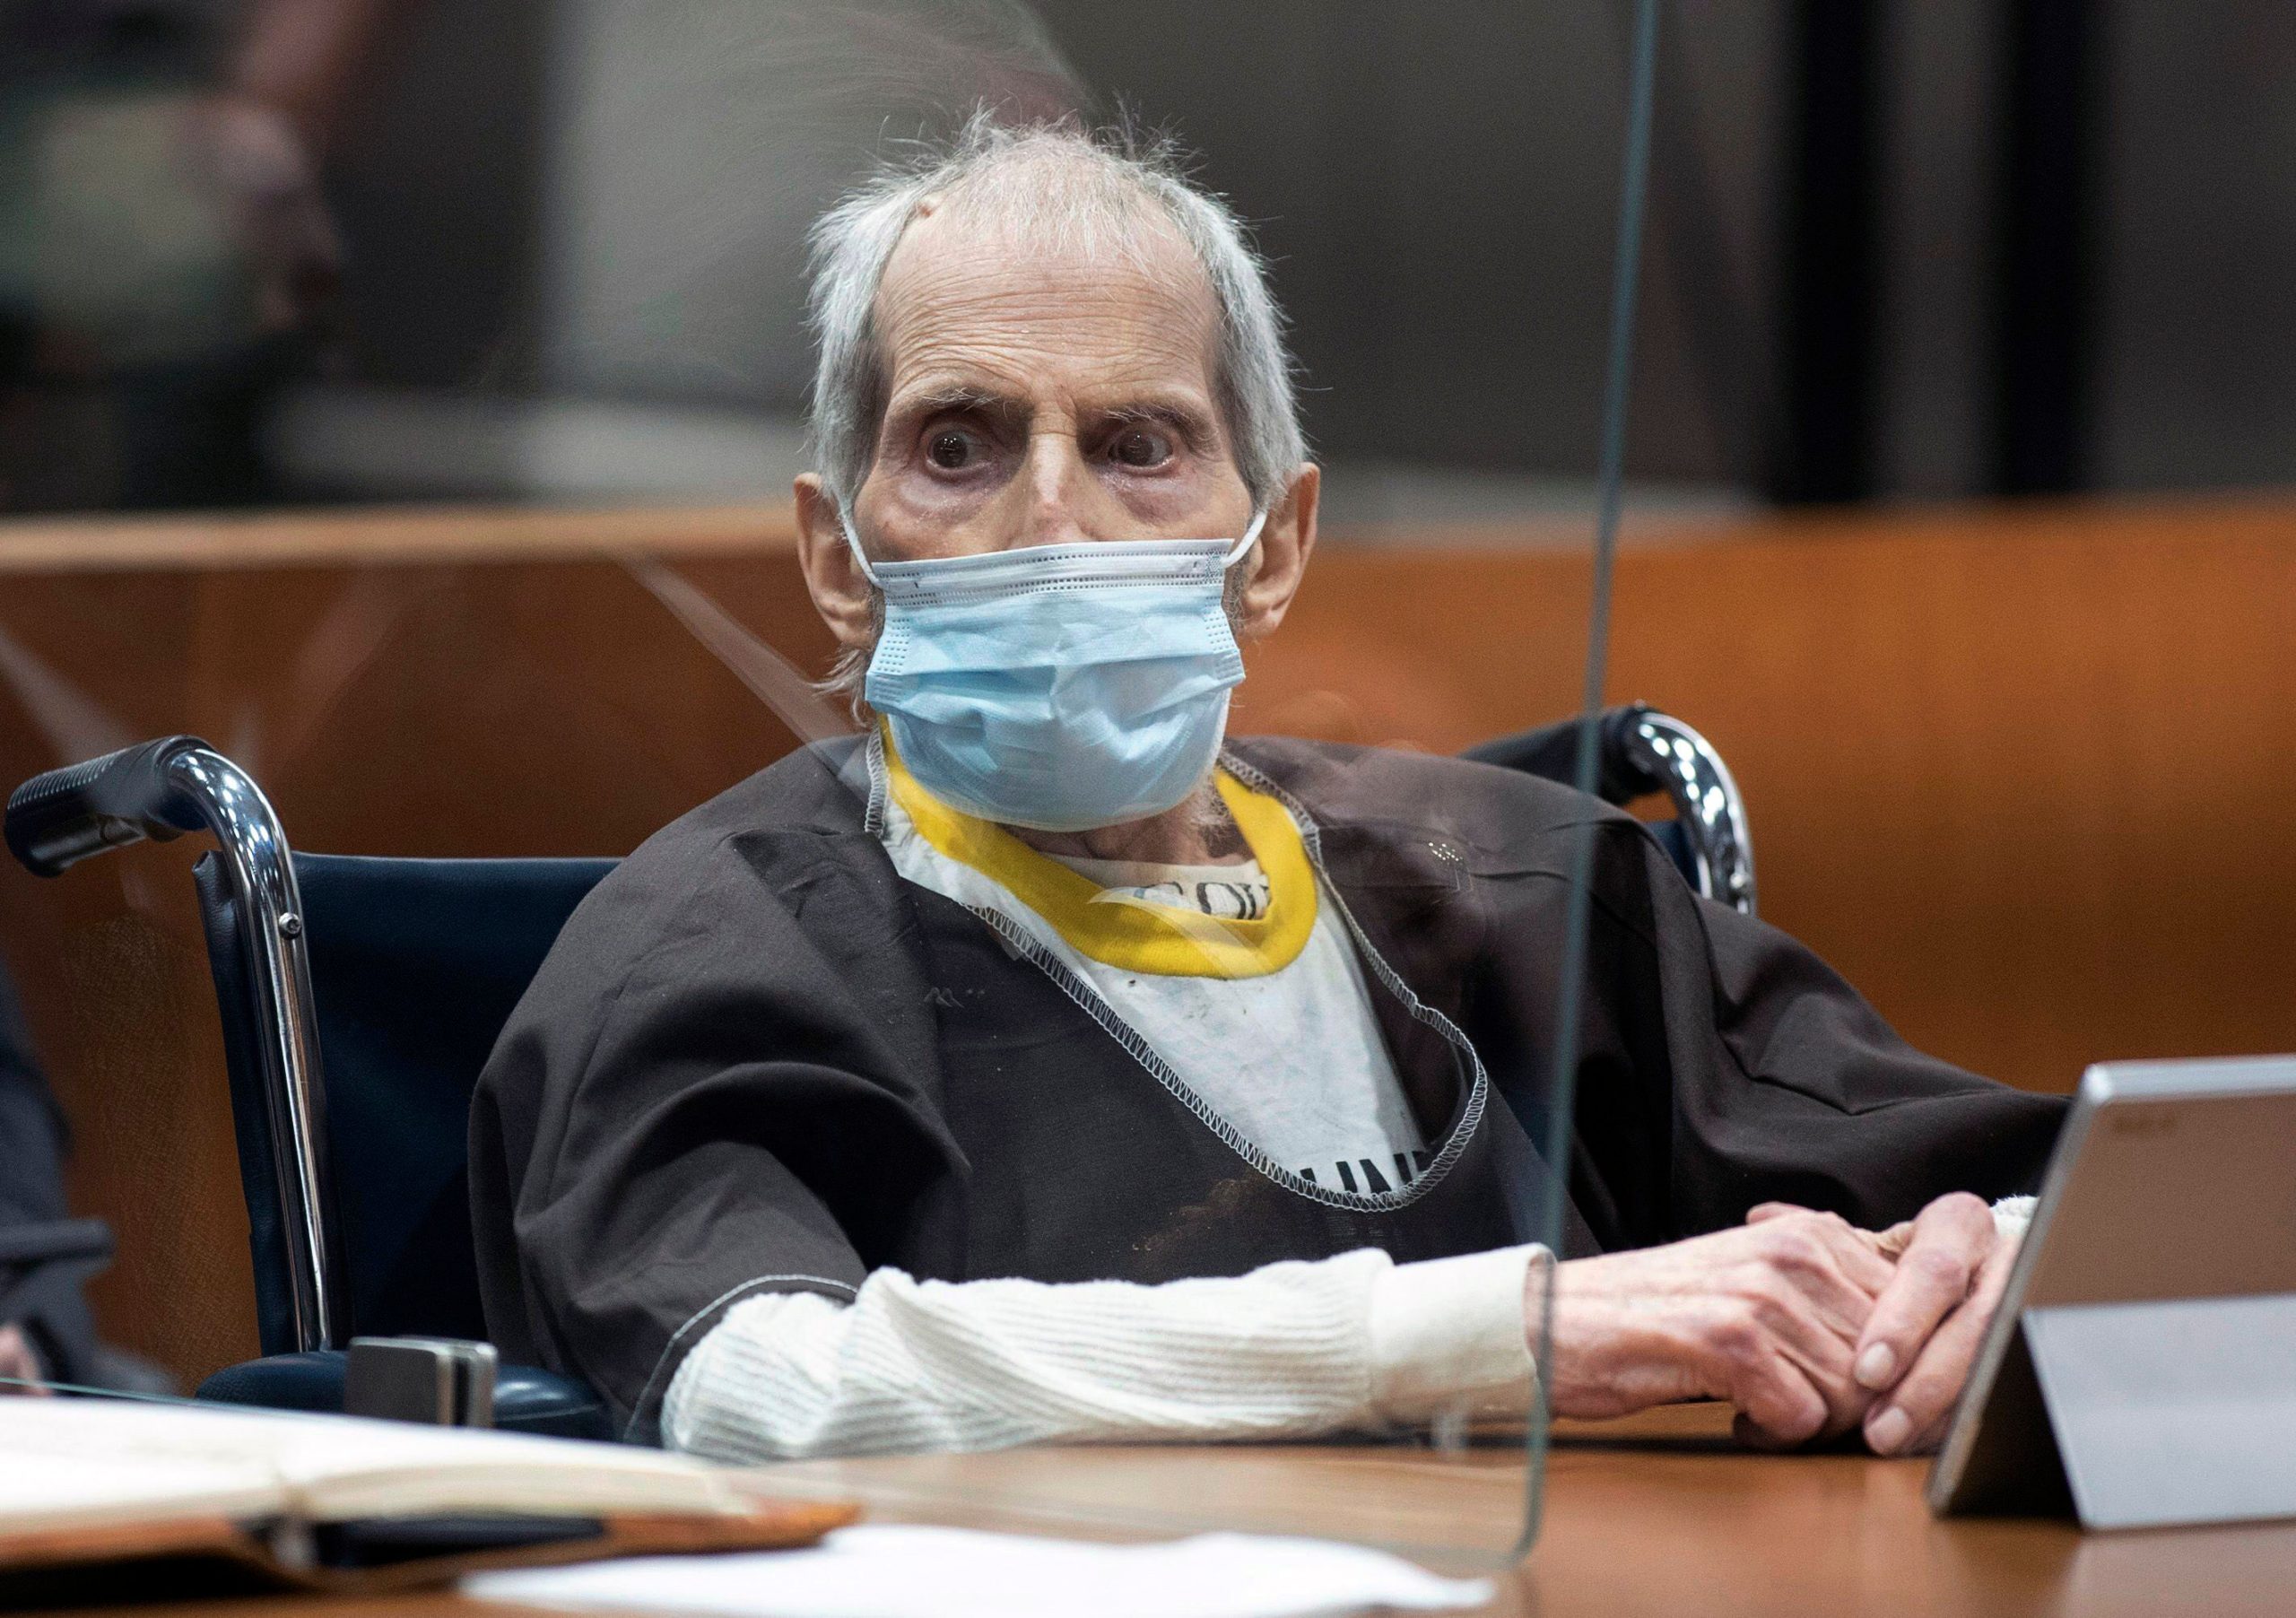 Robert Durst charged with 1982 murder of wife Kathie Durst